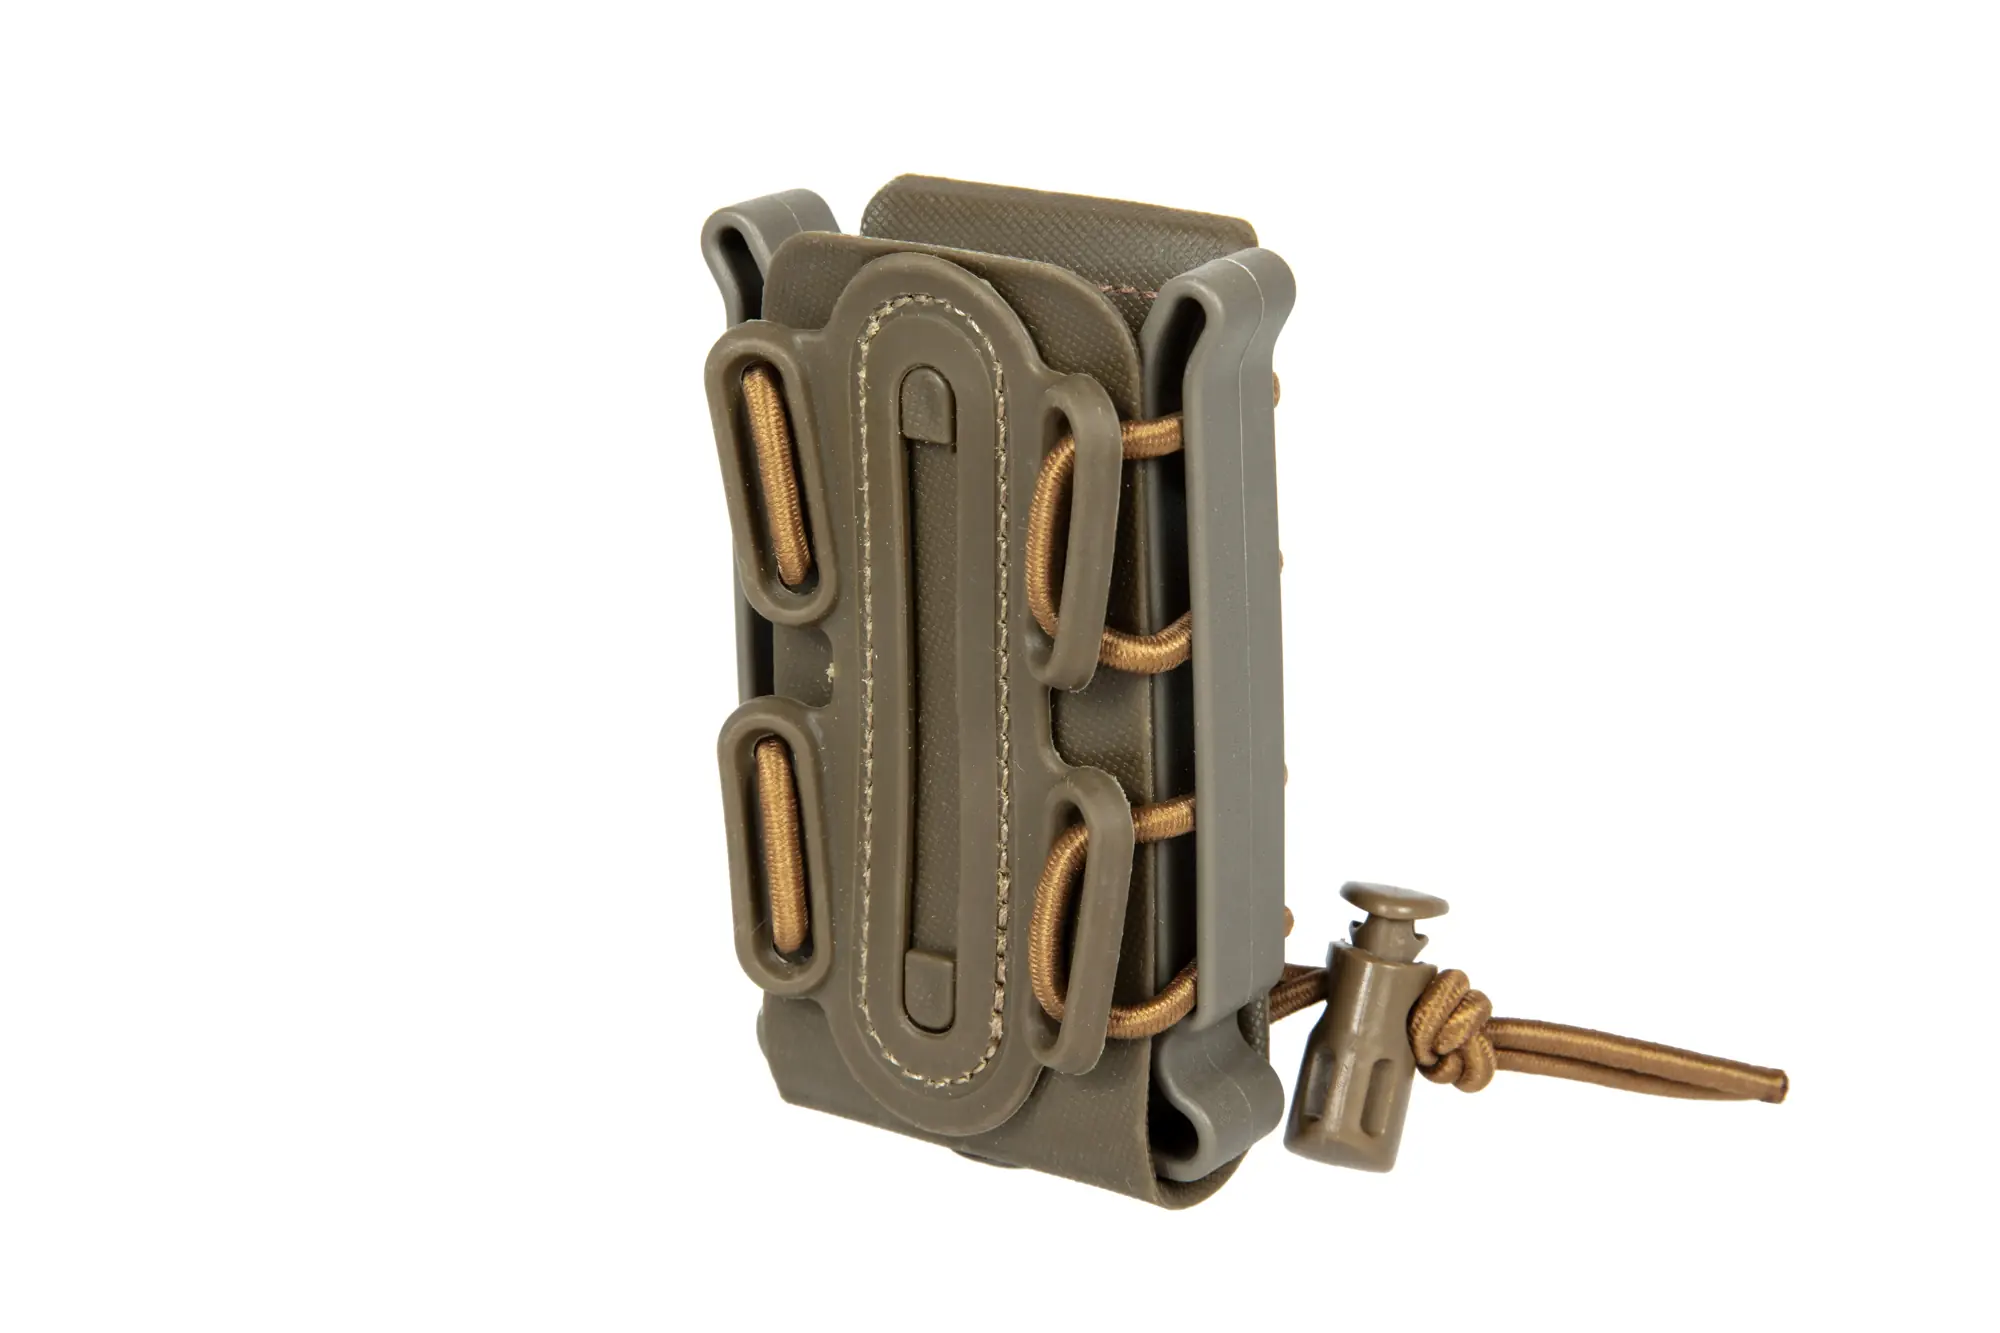 Lopid Polymer Short Pistol Magazine Pouch - Coyote Brown